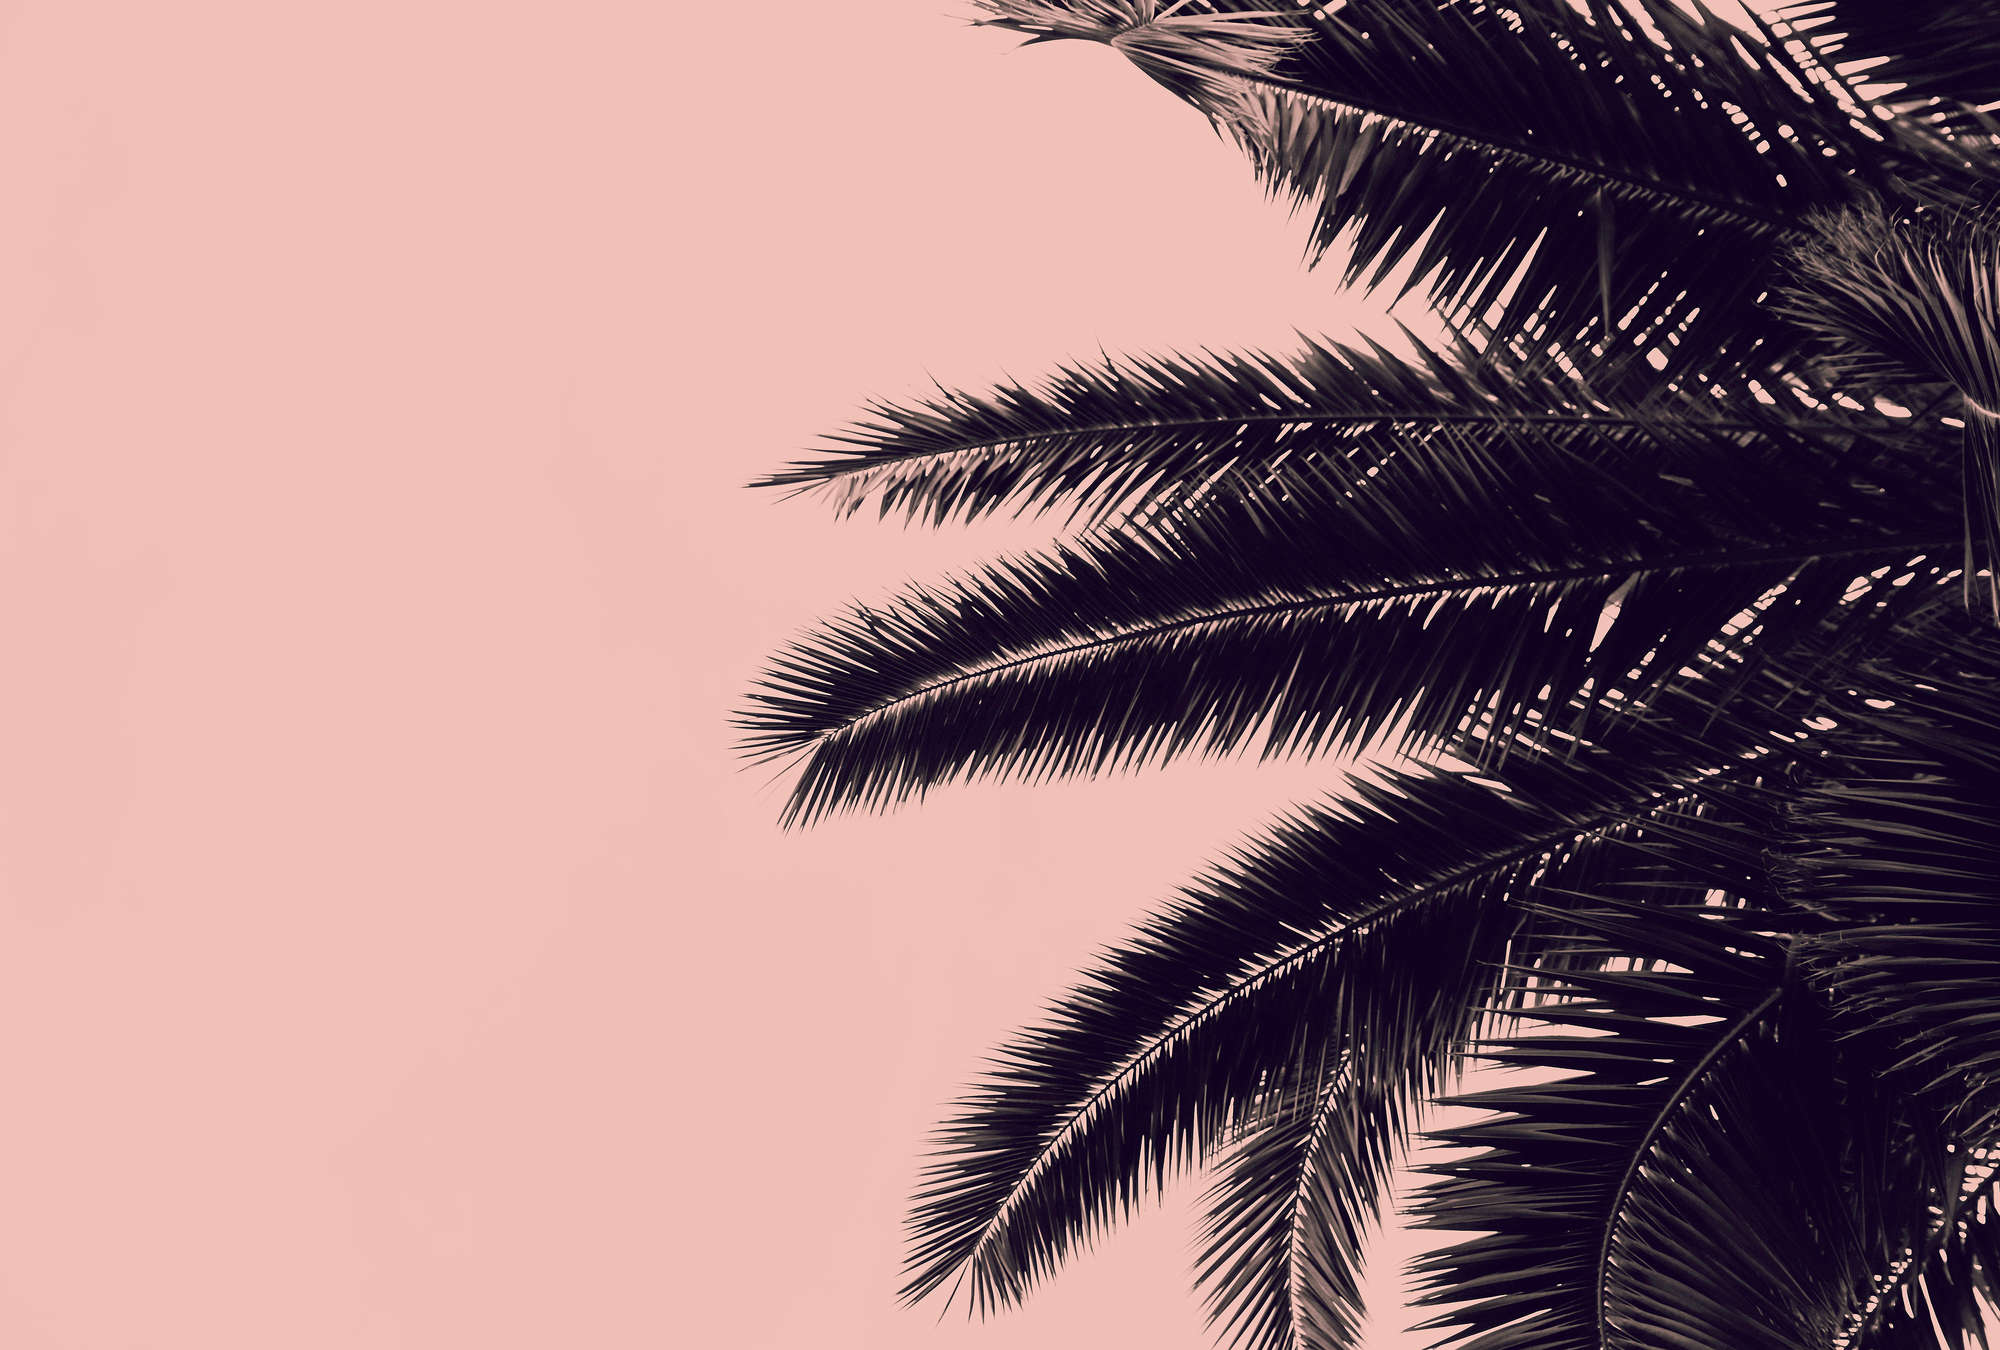             Pink photo wallpaper with black palm leaves
        